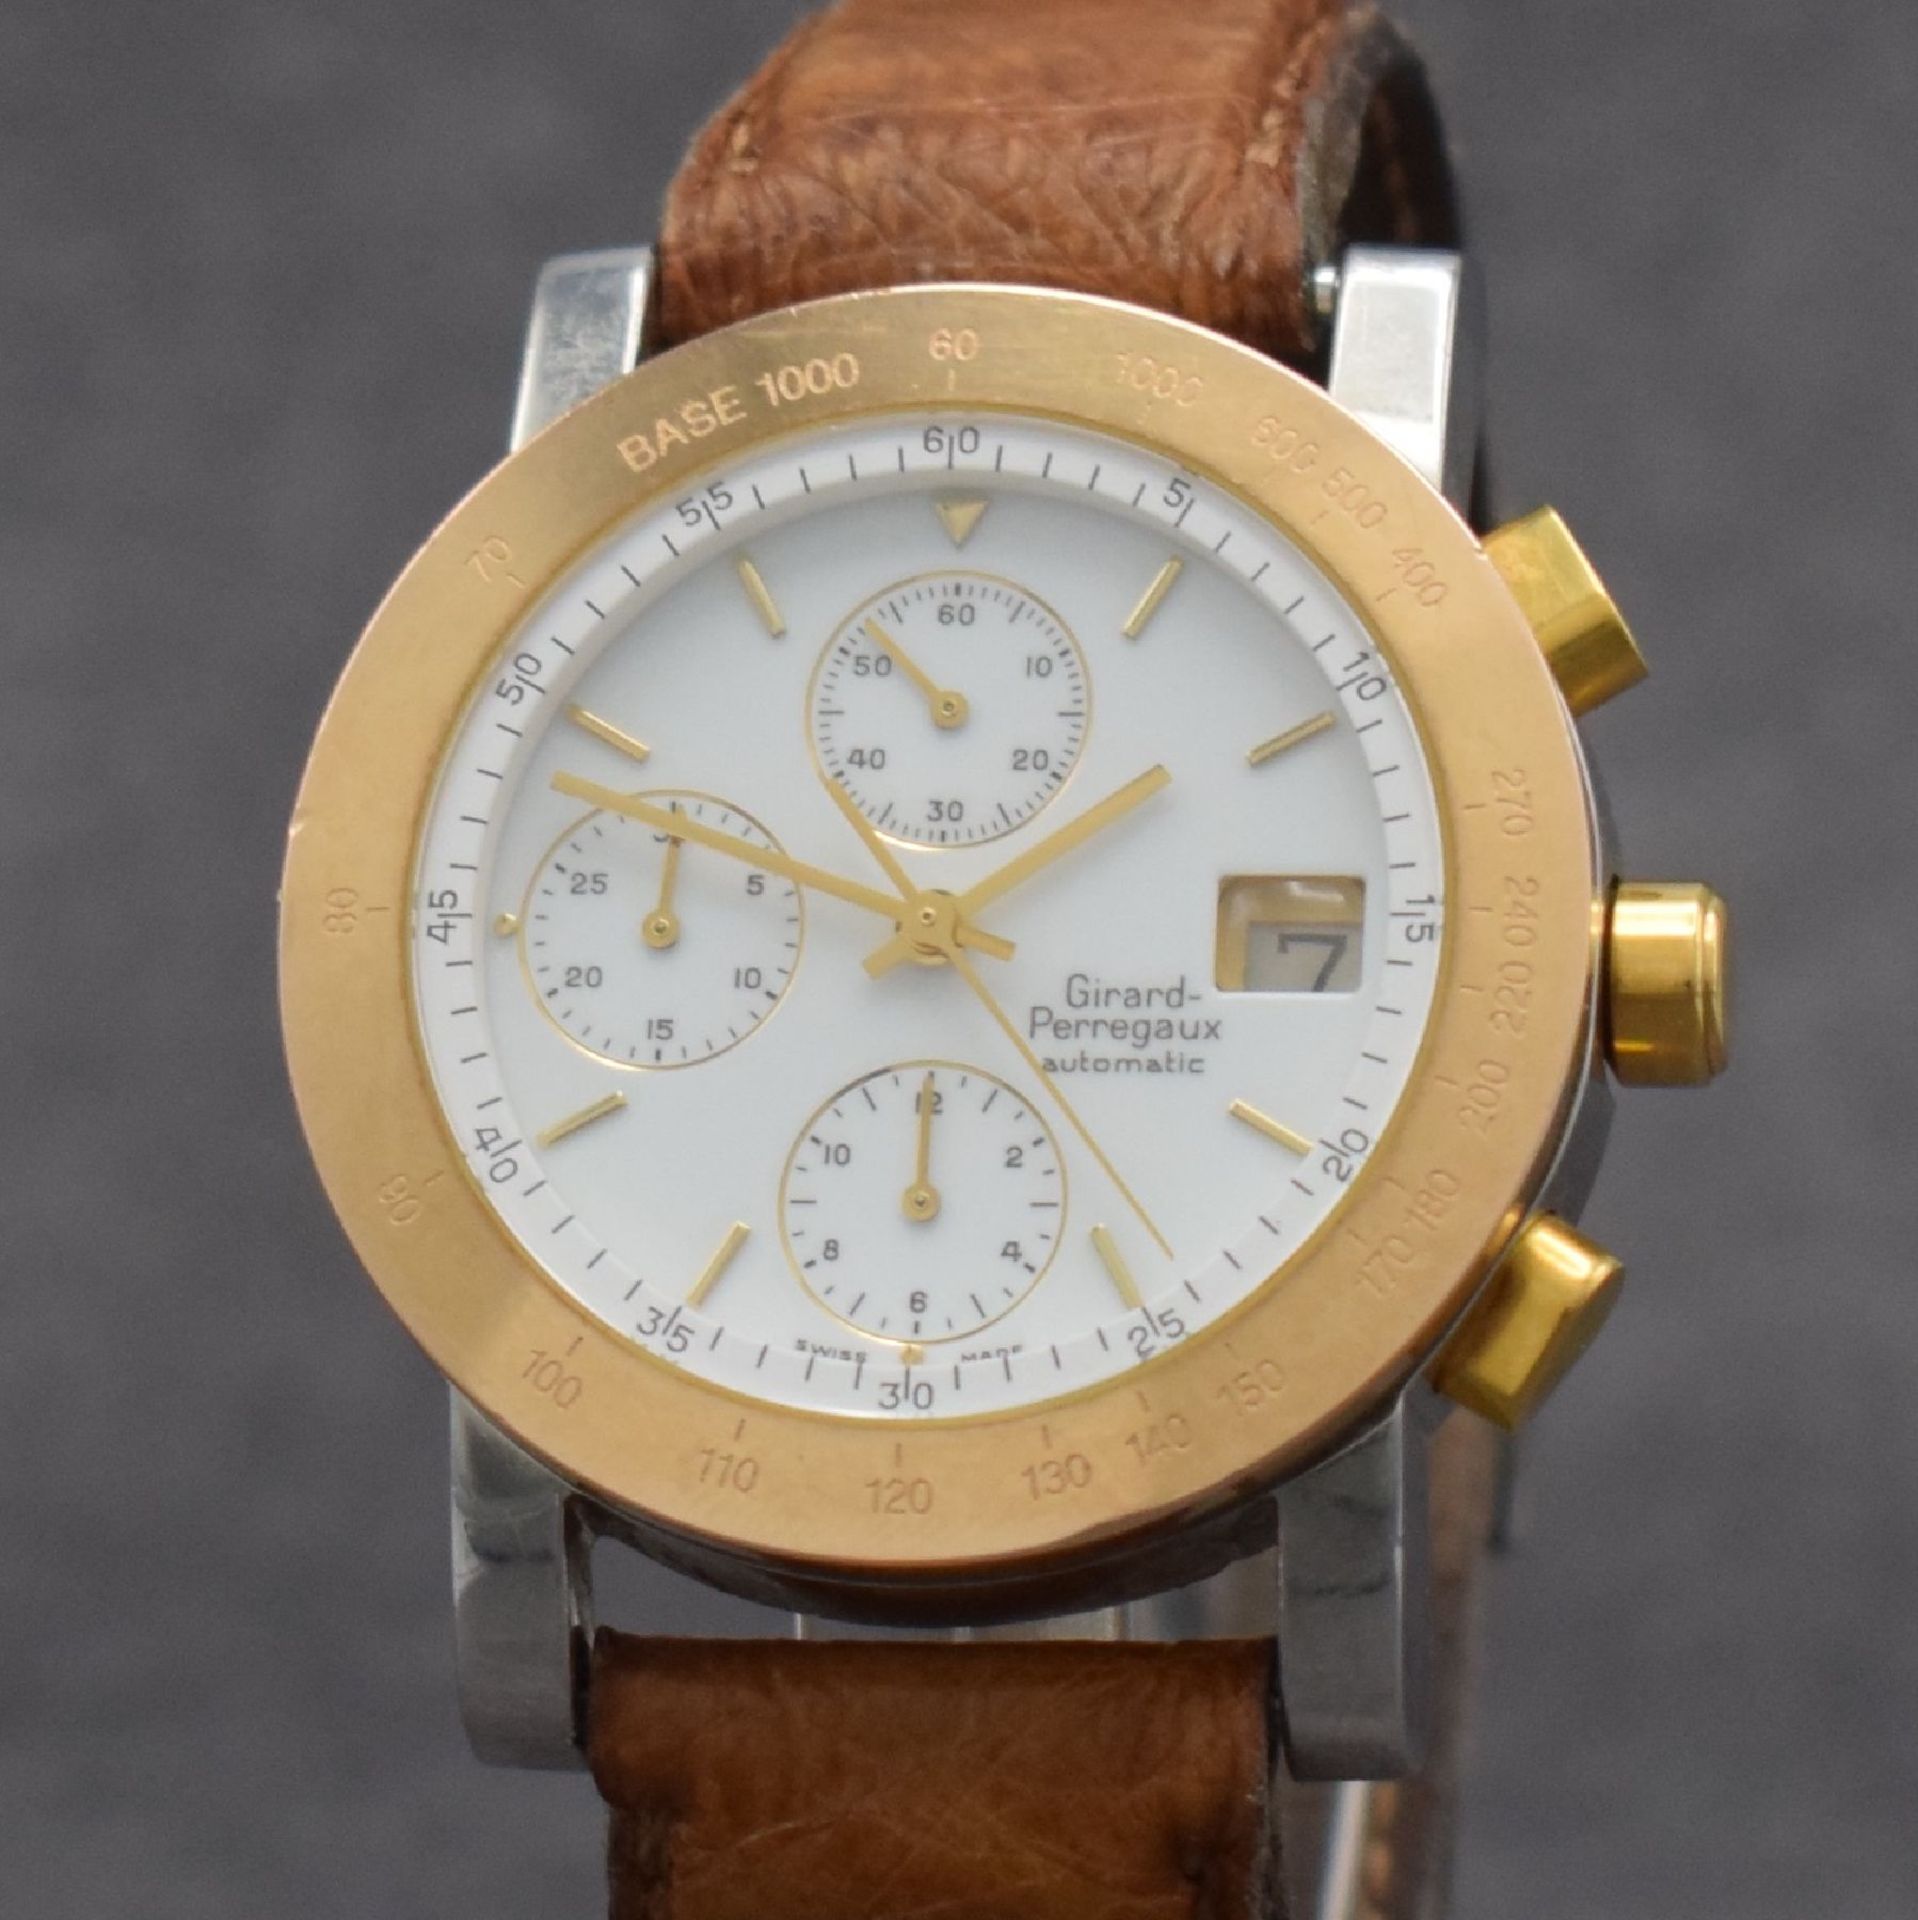 GIRARD PERREGAUX Herrenchronograph in Stahl un18k Rotgold, - Image 4 of 6